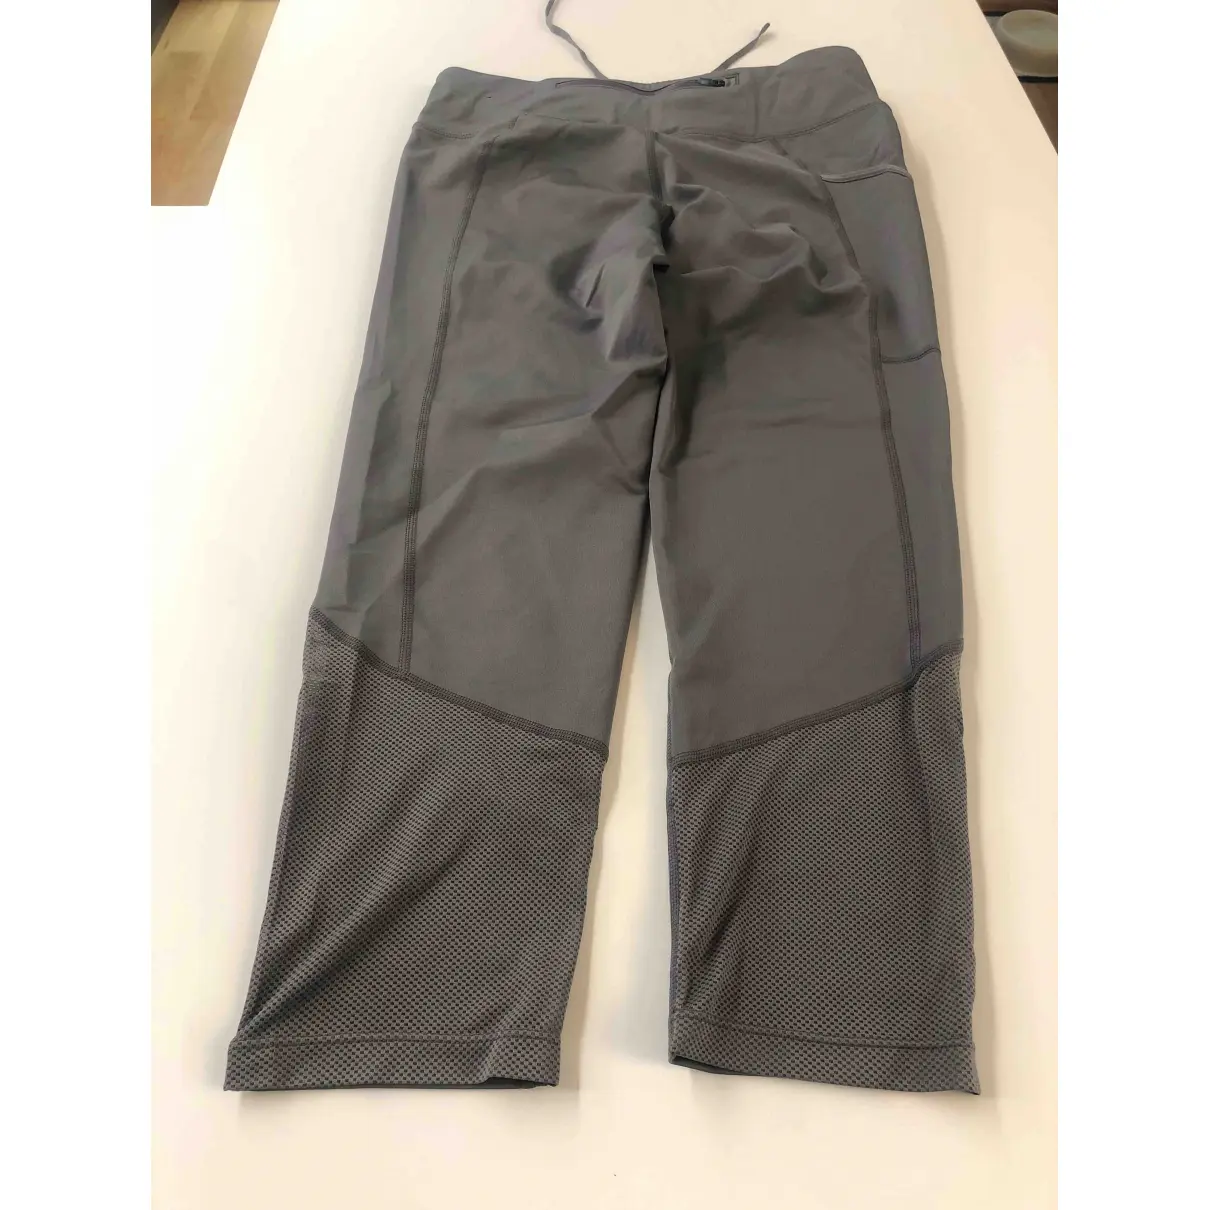 Buy Nike Silver Polyester Trousers online